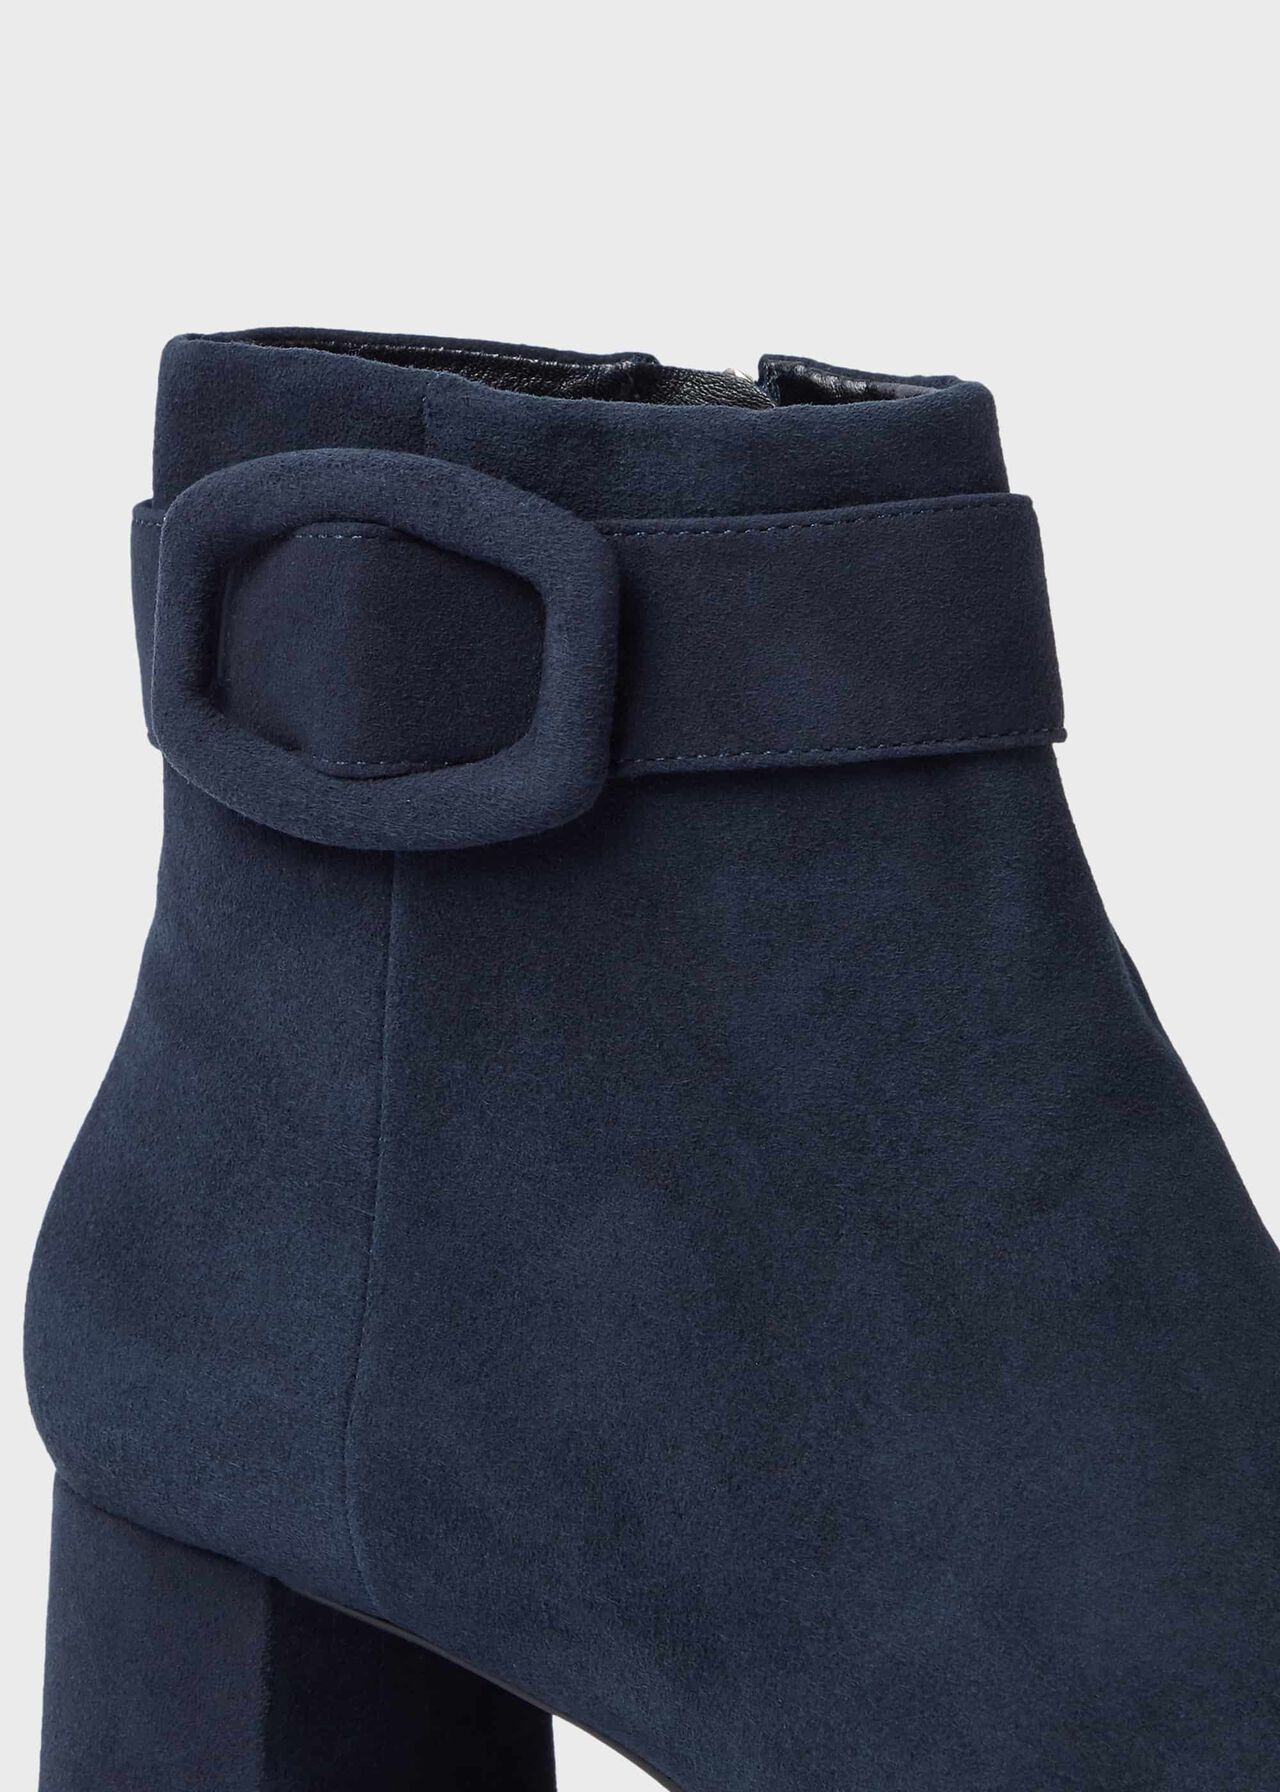 Hailey Ankle Boots, Navy, hi-res